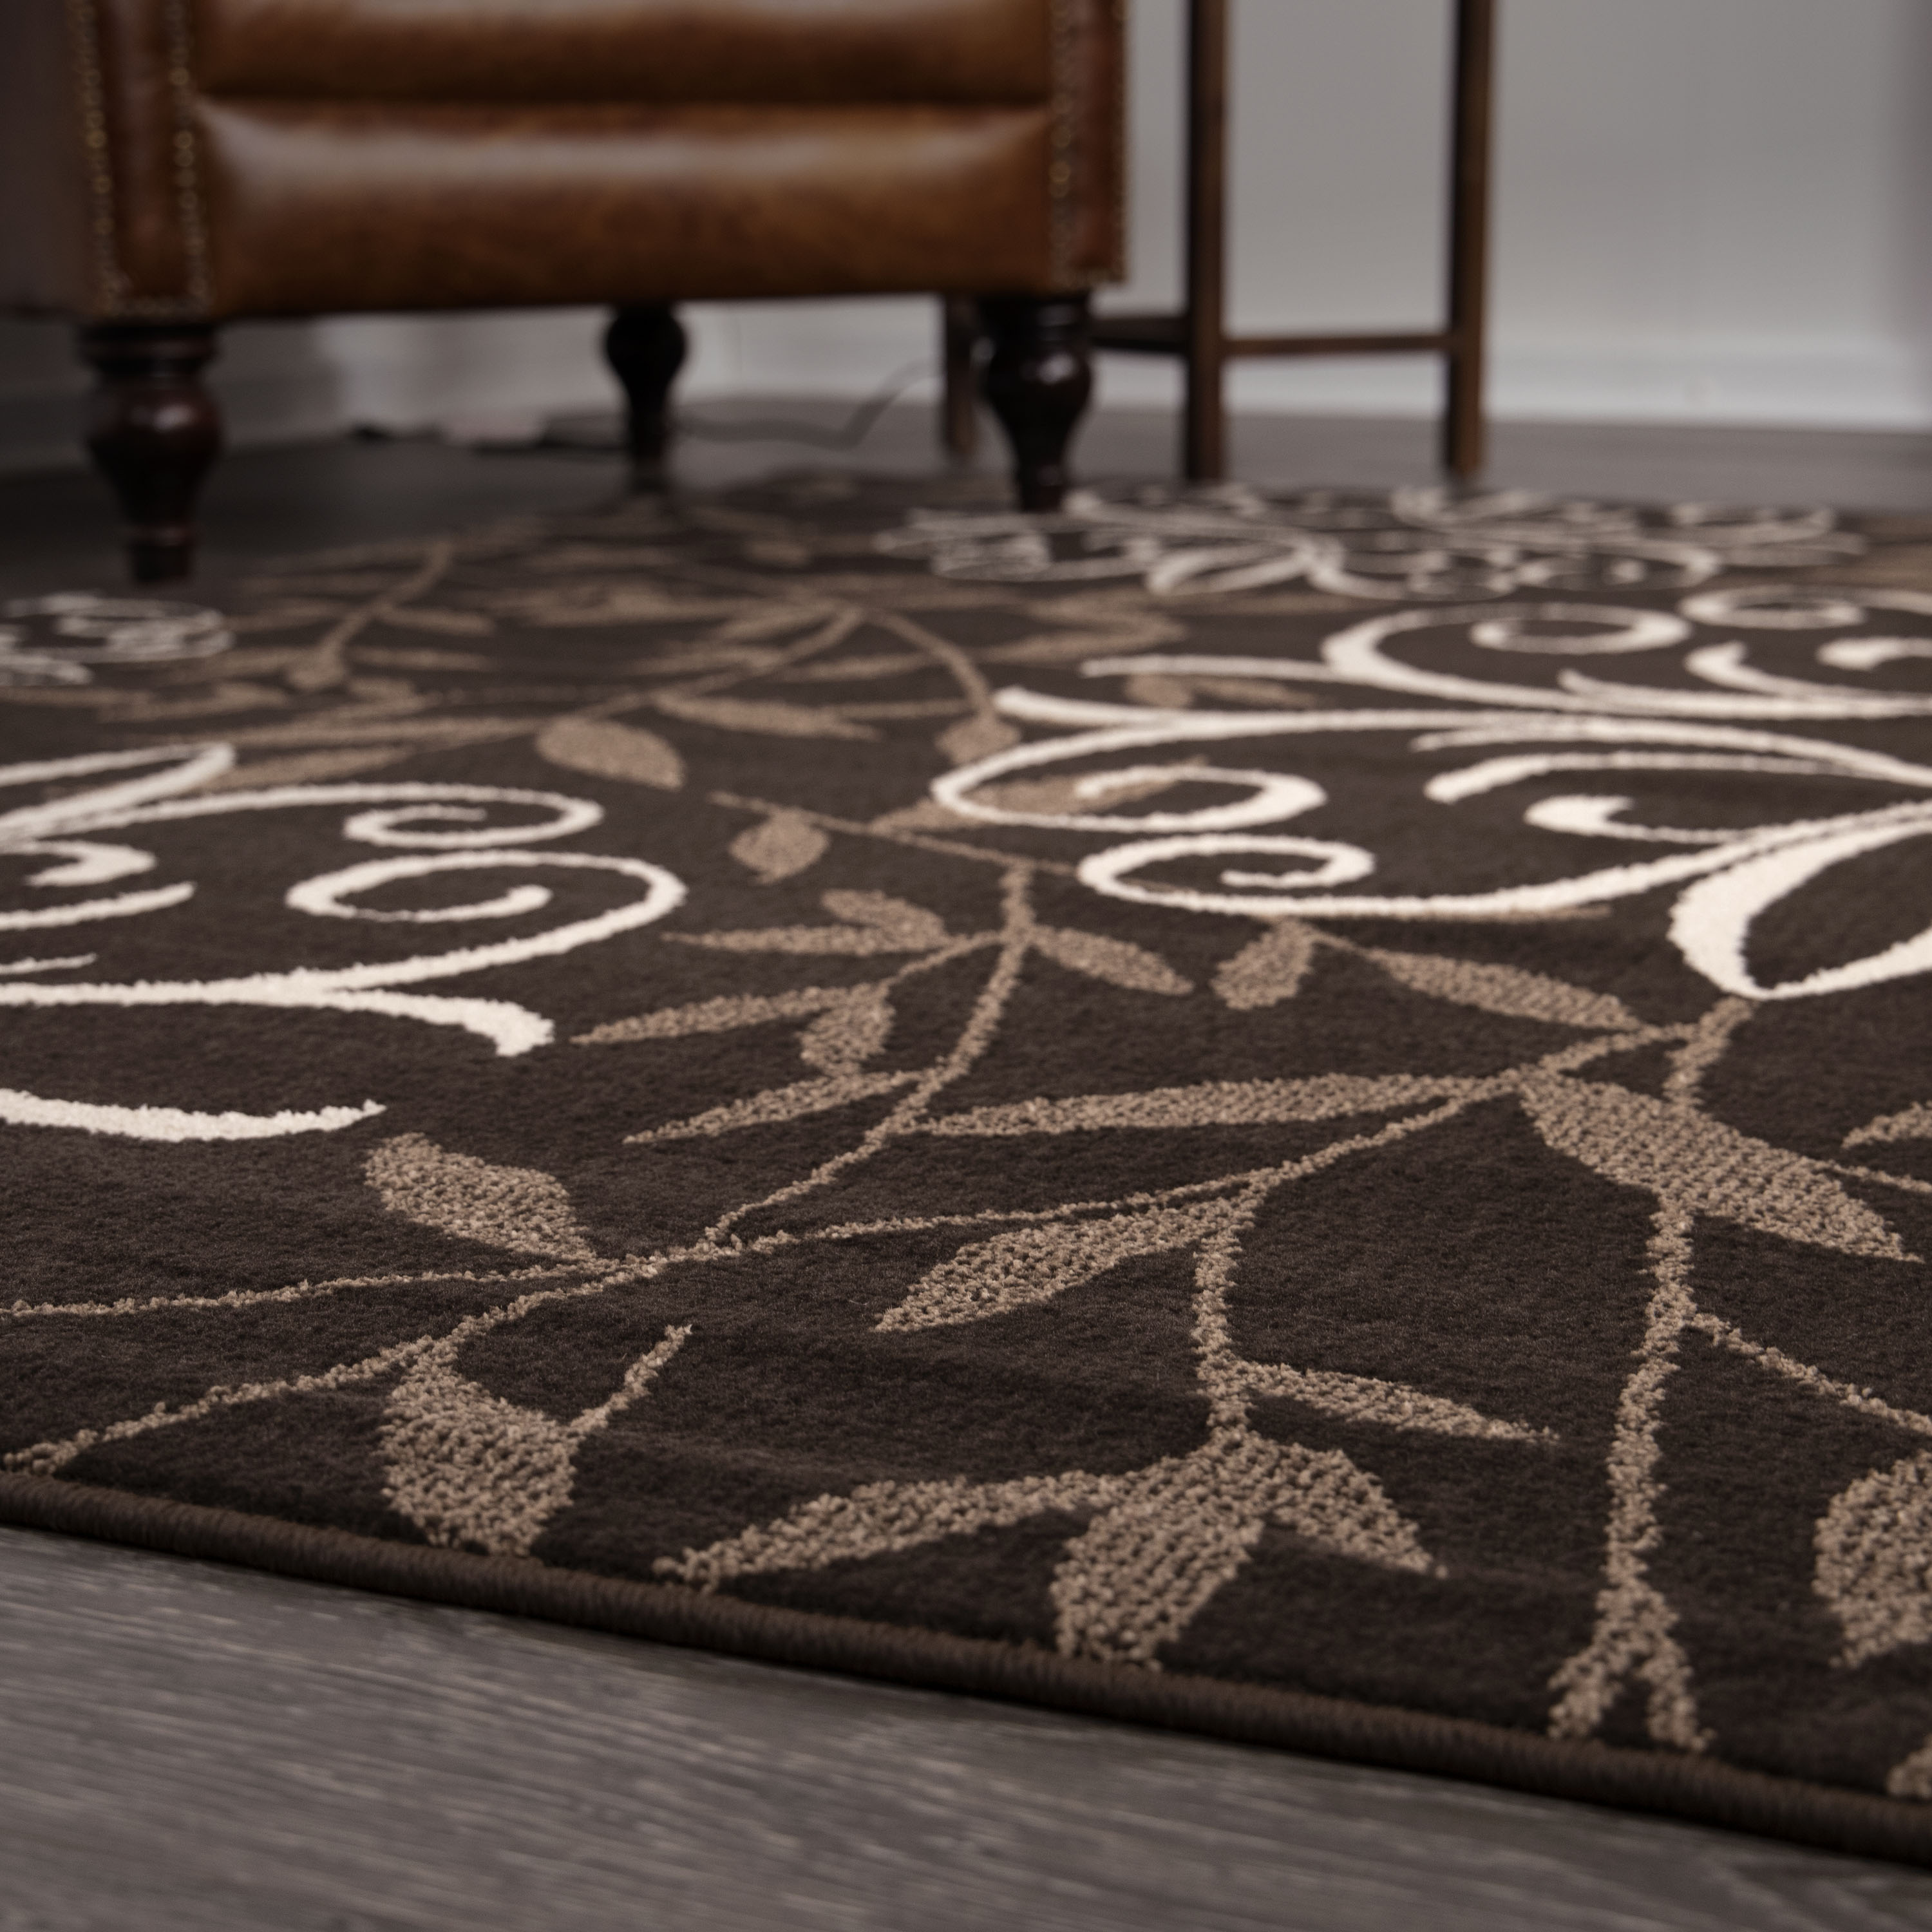 Better Homes & Gardens Iron Fleur Area Rug, Brown, 9' x 13' - image 3 of 10